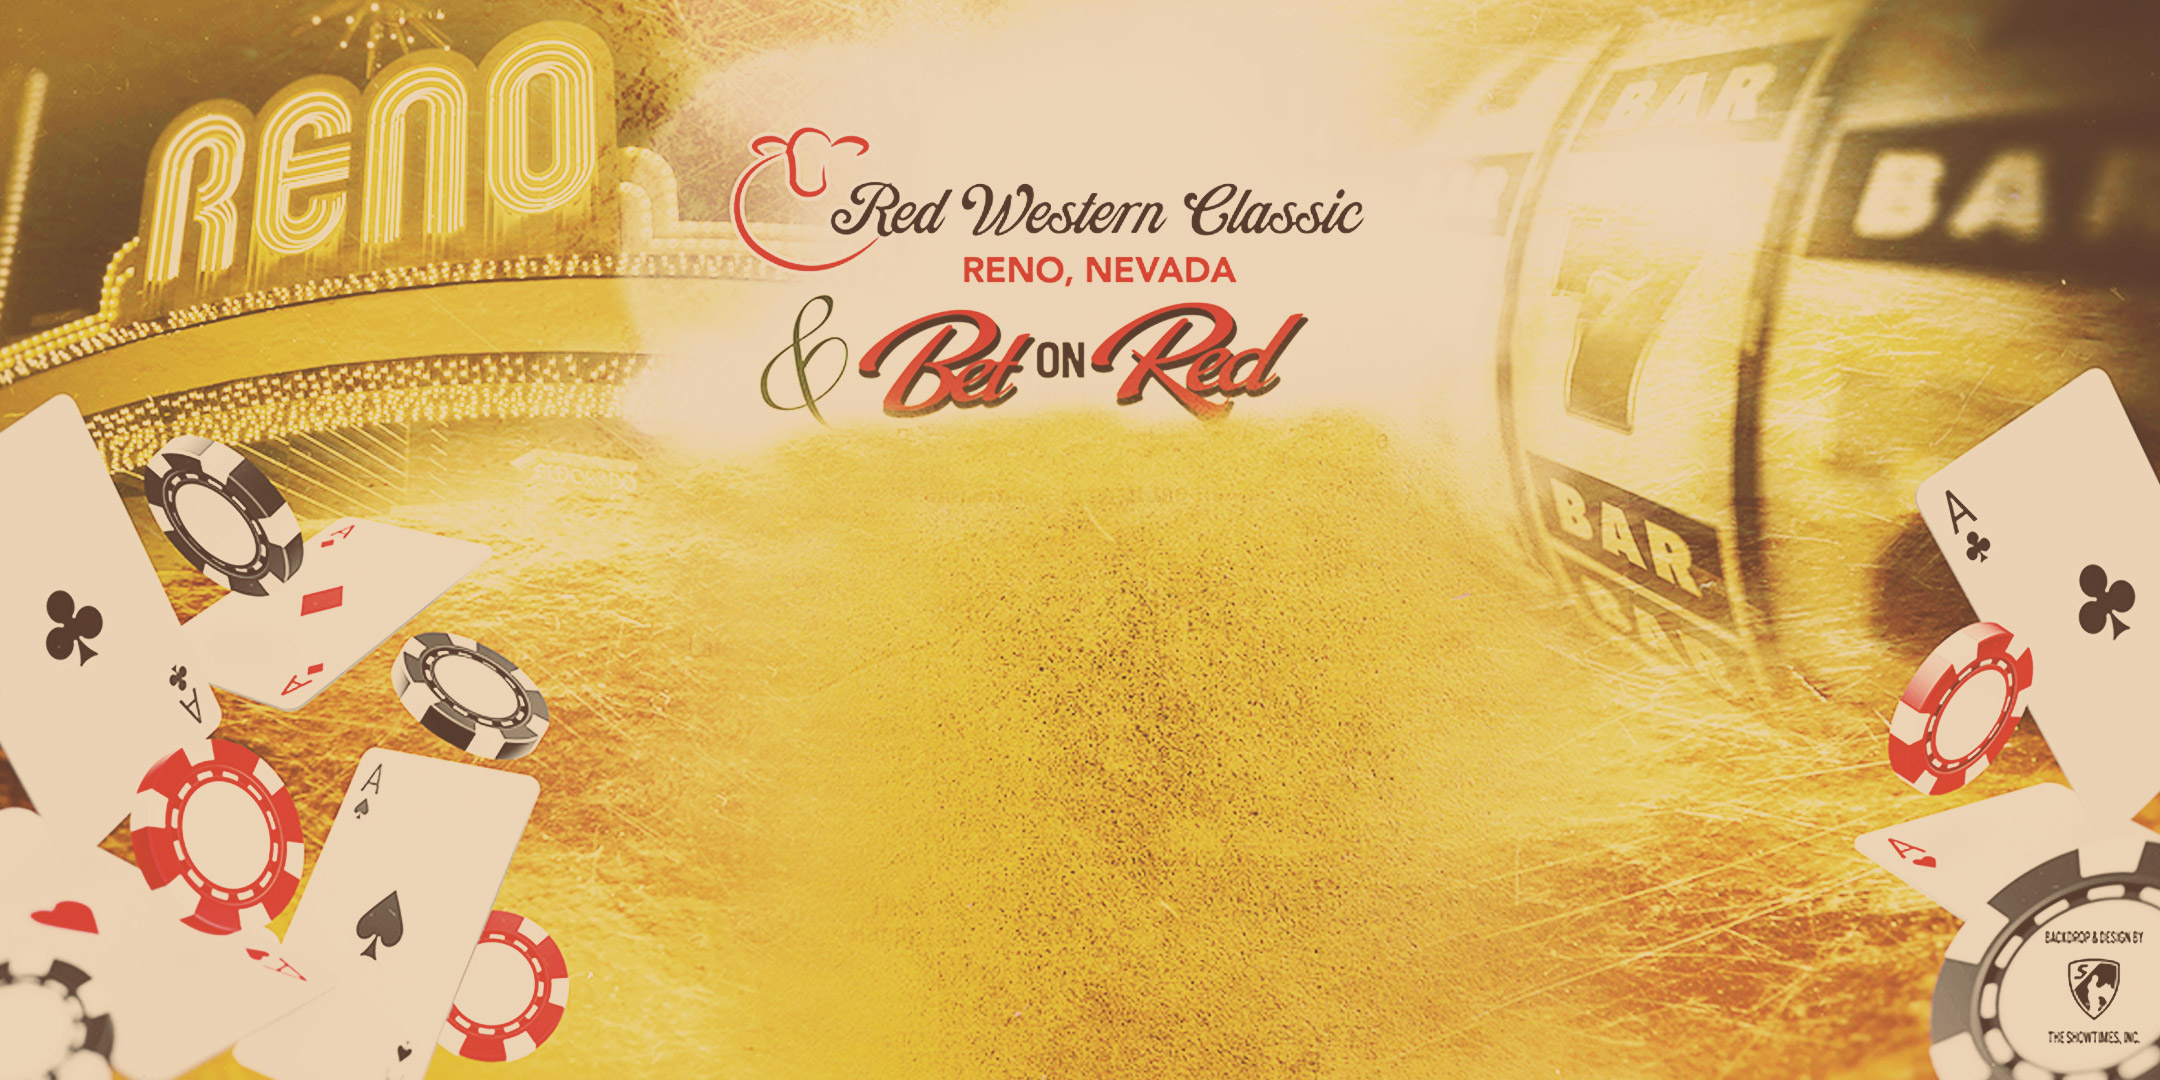 Bet on Red Sale & Red Western Classic Show